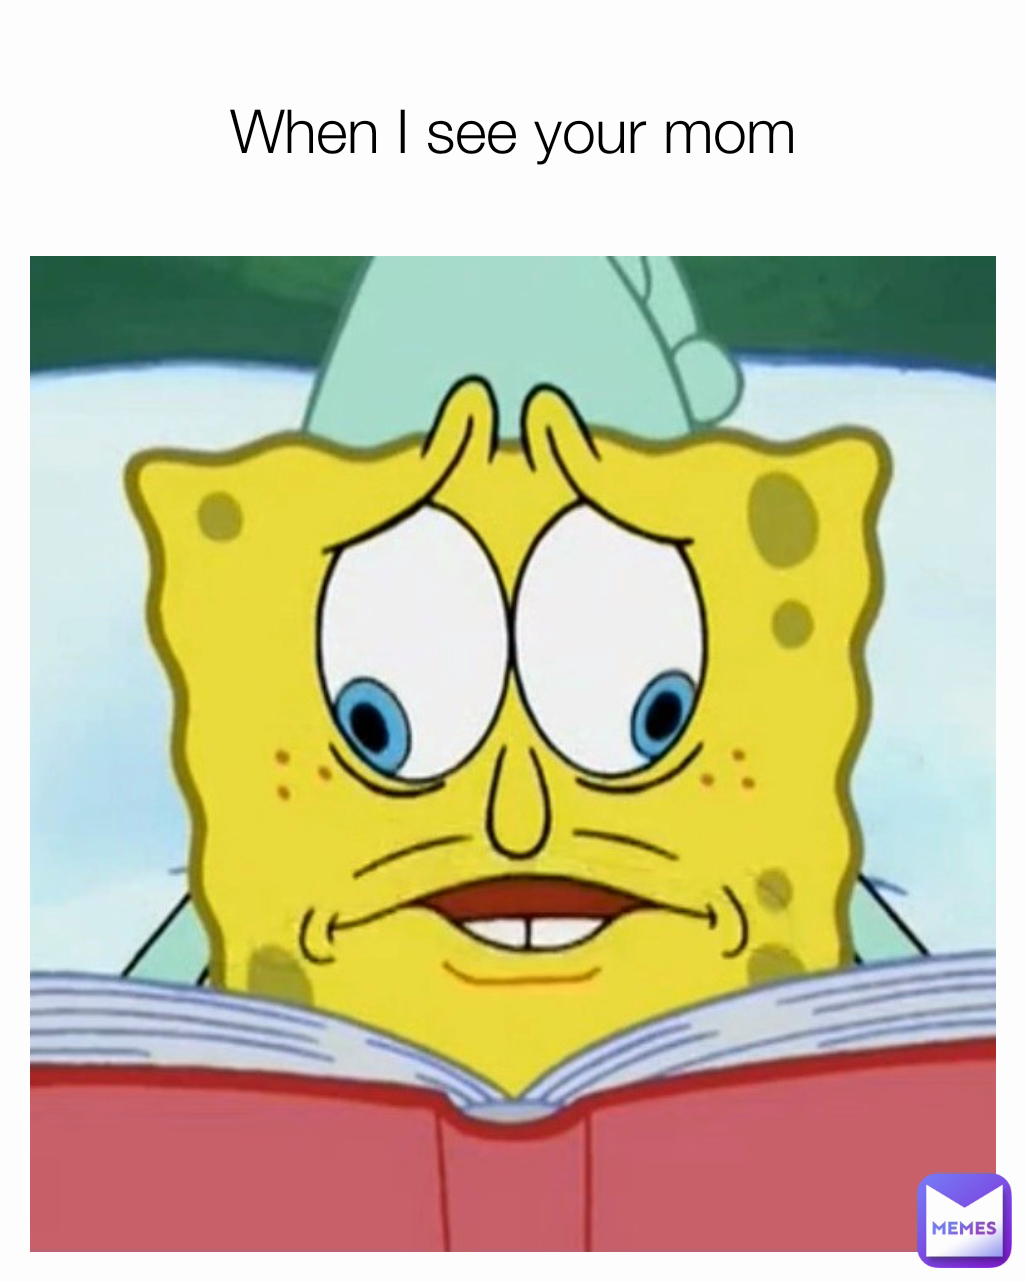 When I see your mom